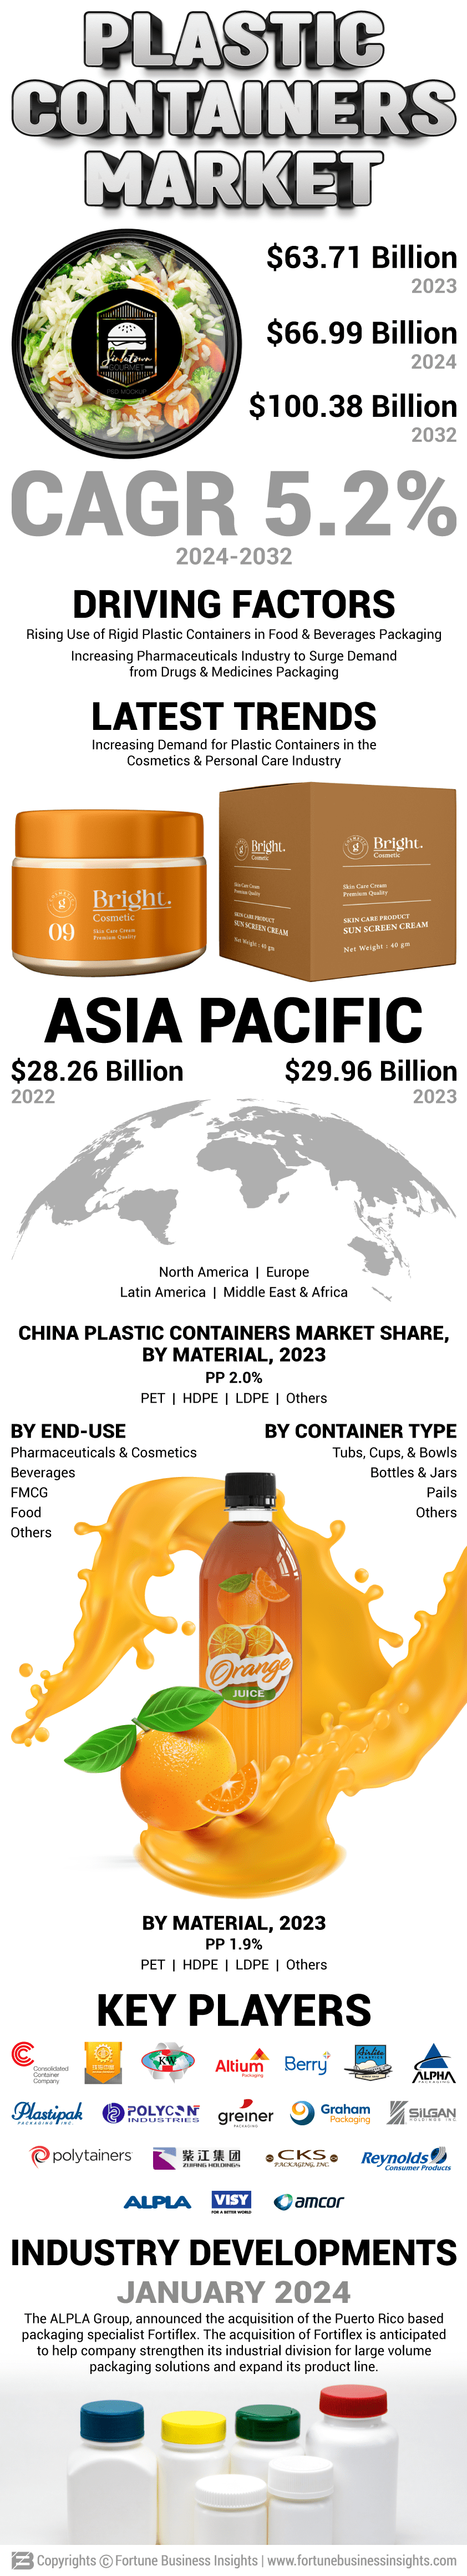 Plastic Containers Market